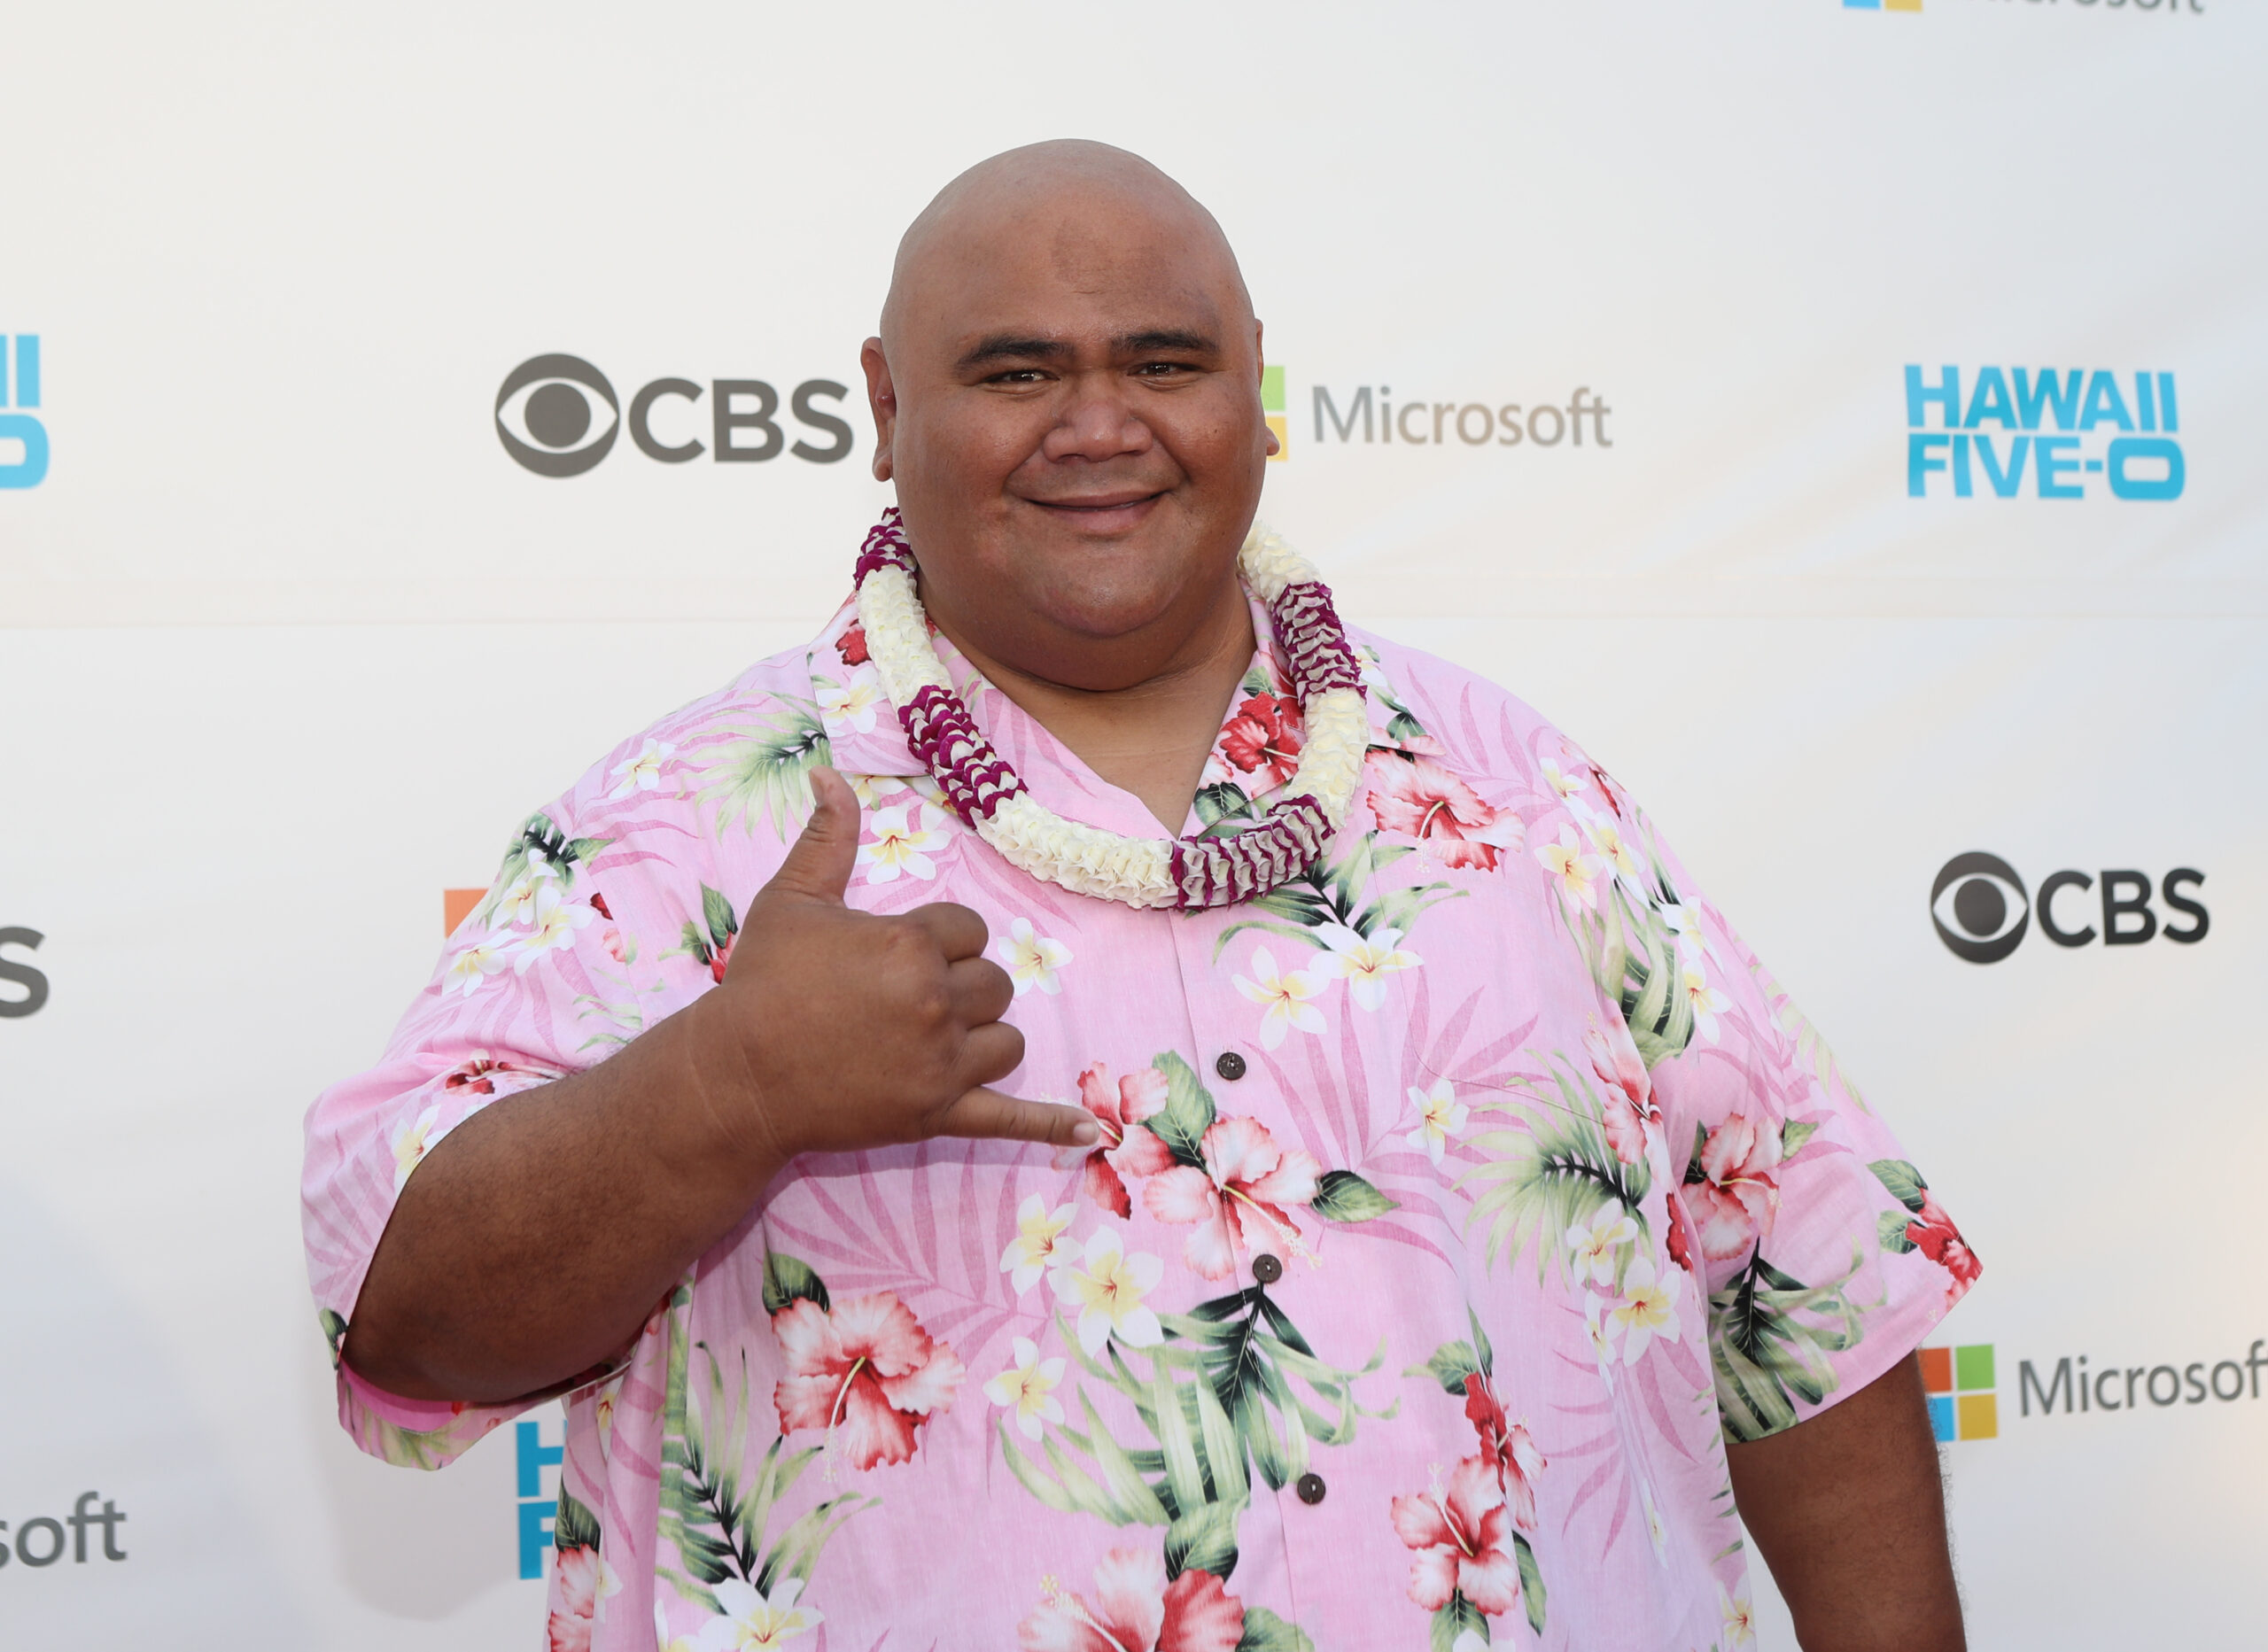 Taylor Wily, Known for ‘Hawaii Five-0’ and ‘Forgetting Sarah Marshall,’ Dies at 56